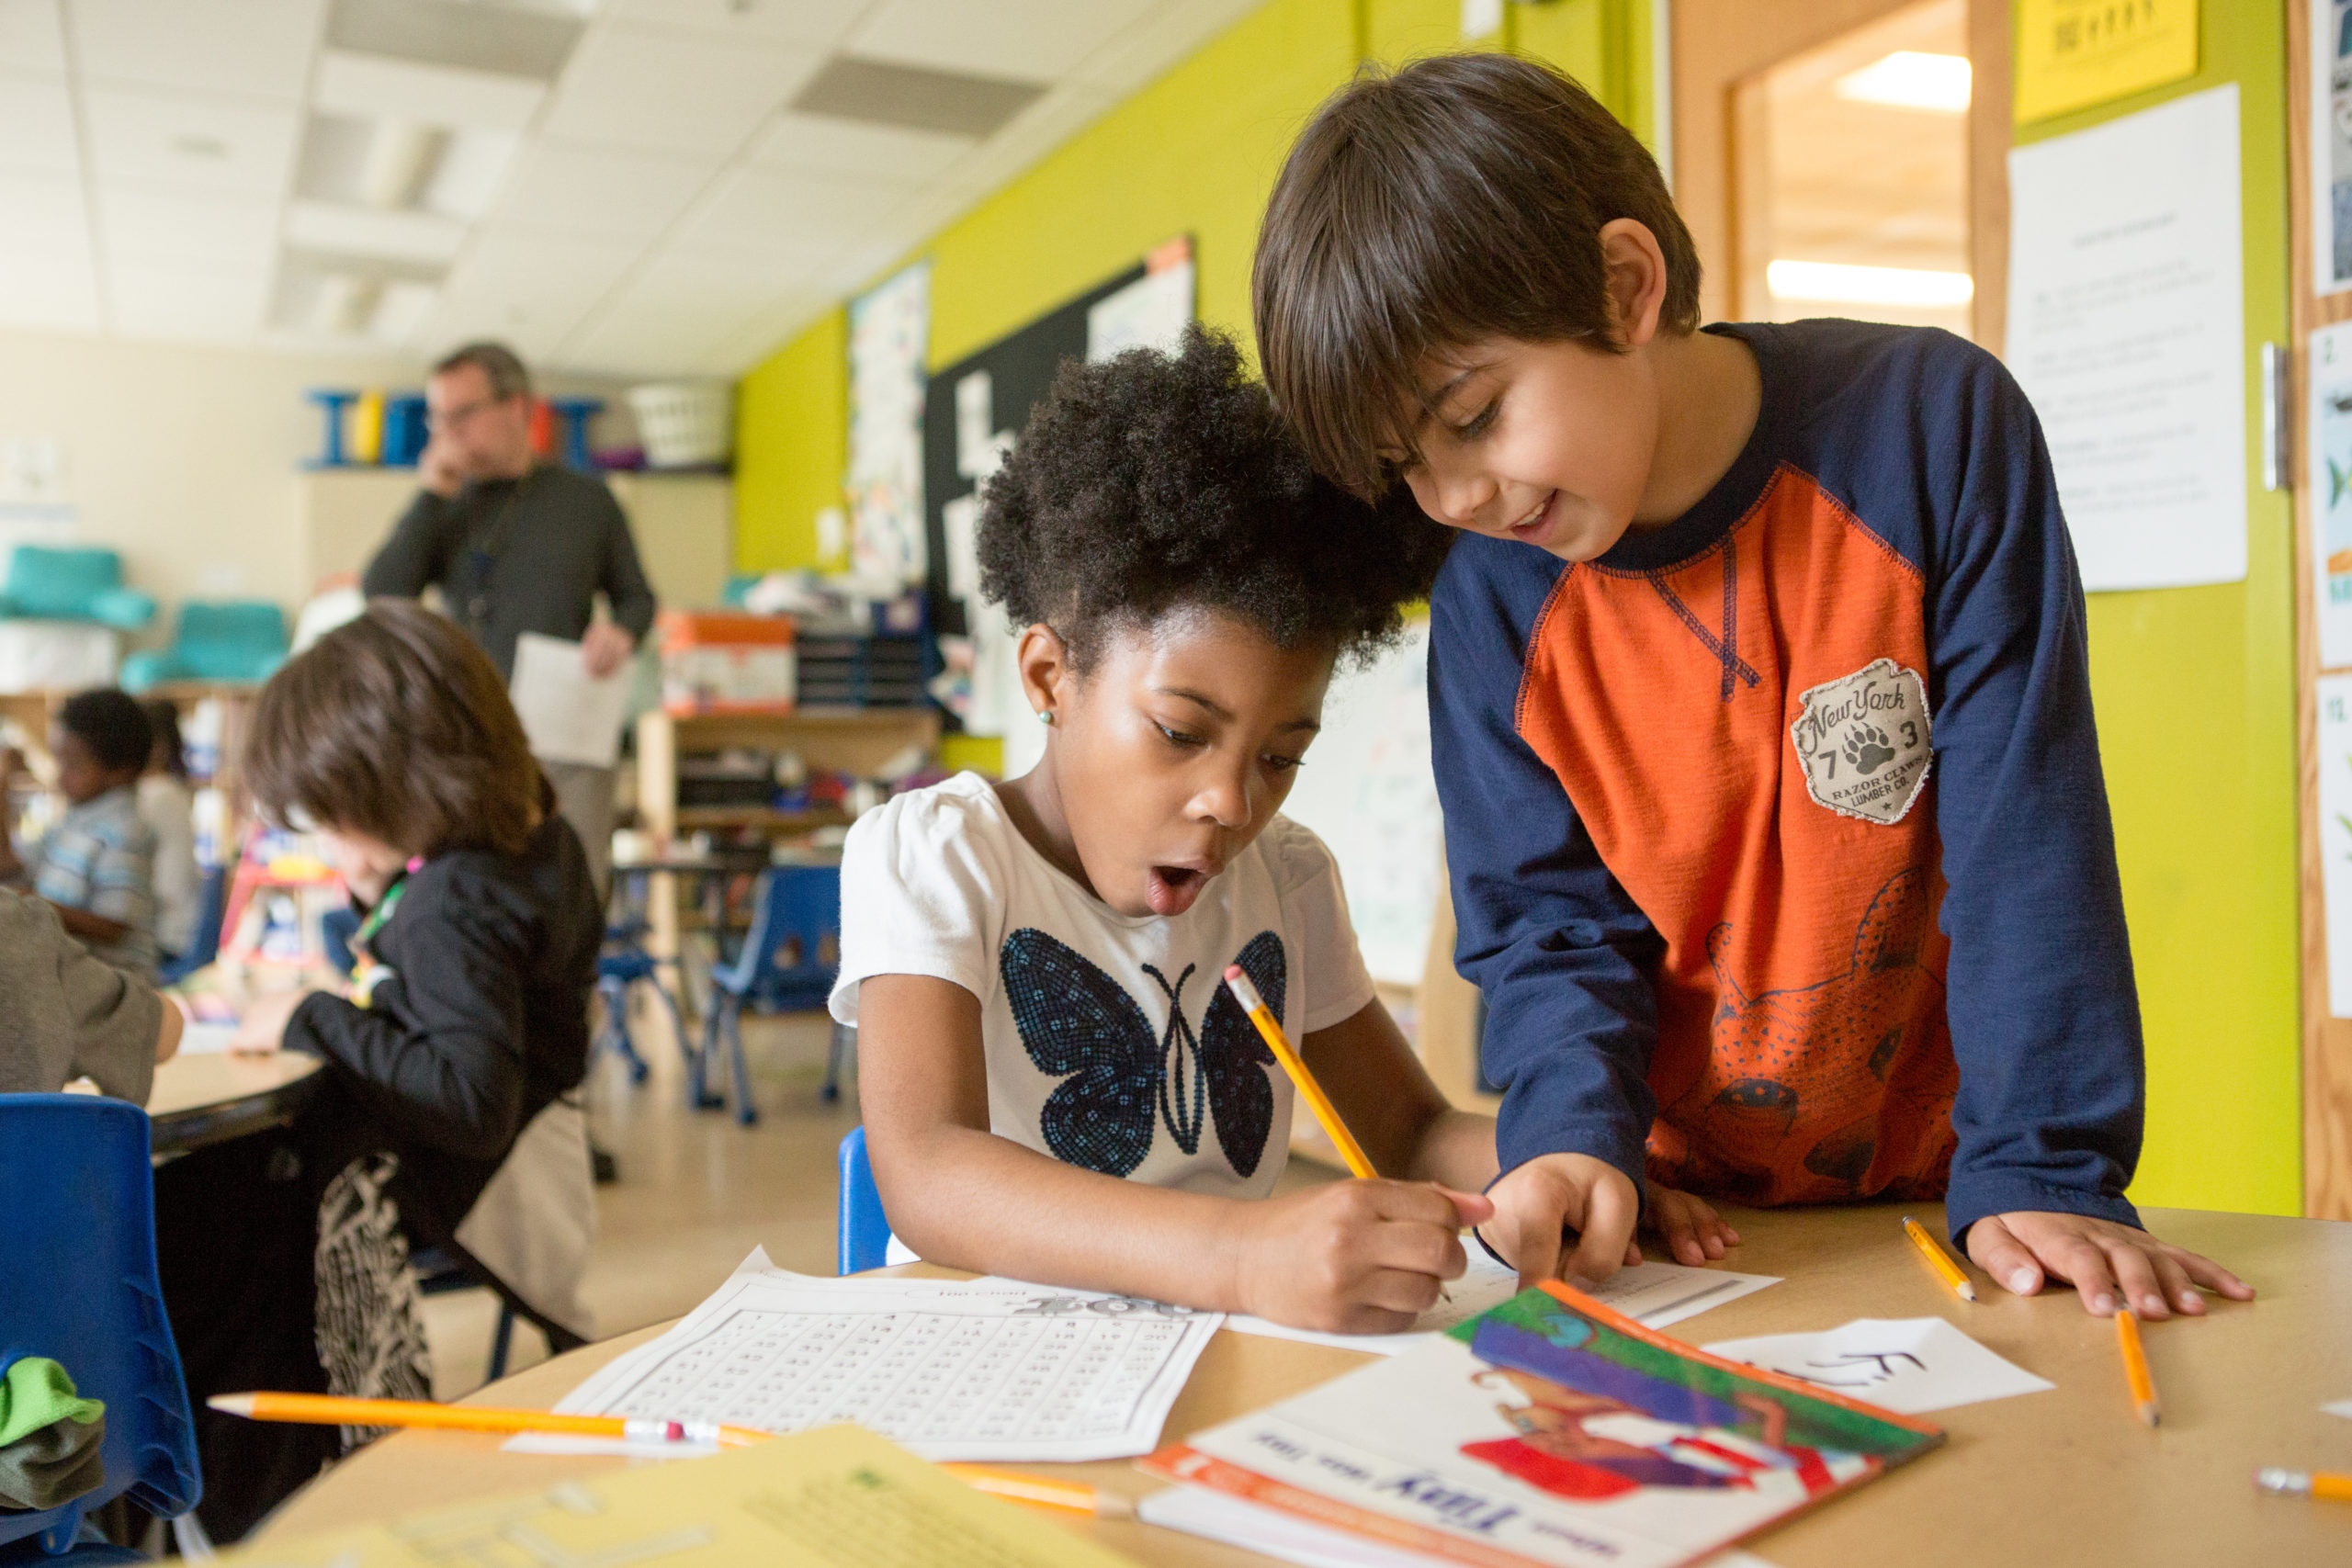 Now is the time for community schools for all Community Schools